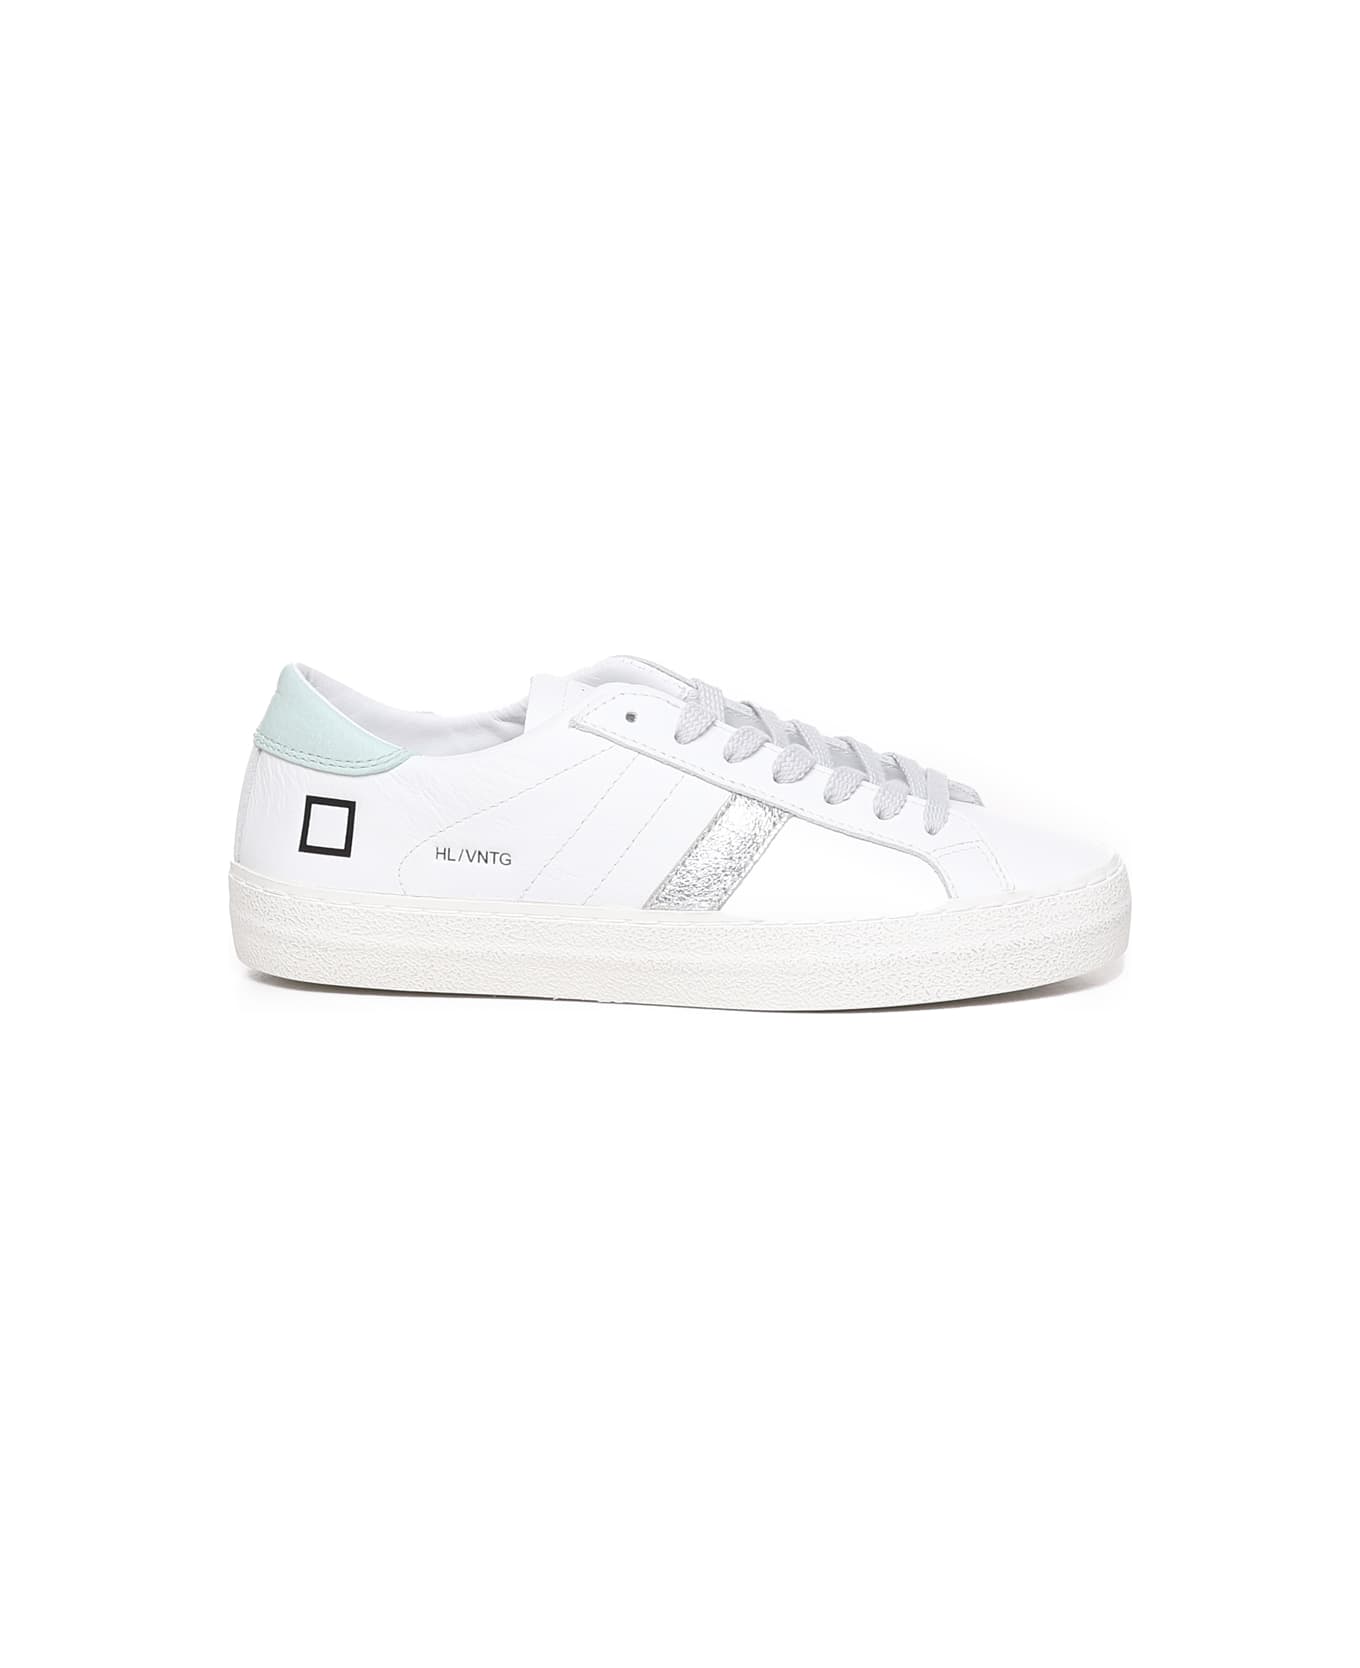 D.A.T.E. Vintage Hill Low Sneakers - White-mint スニーカー